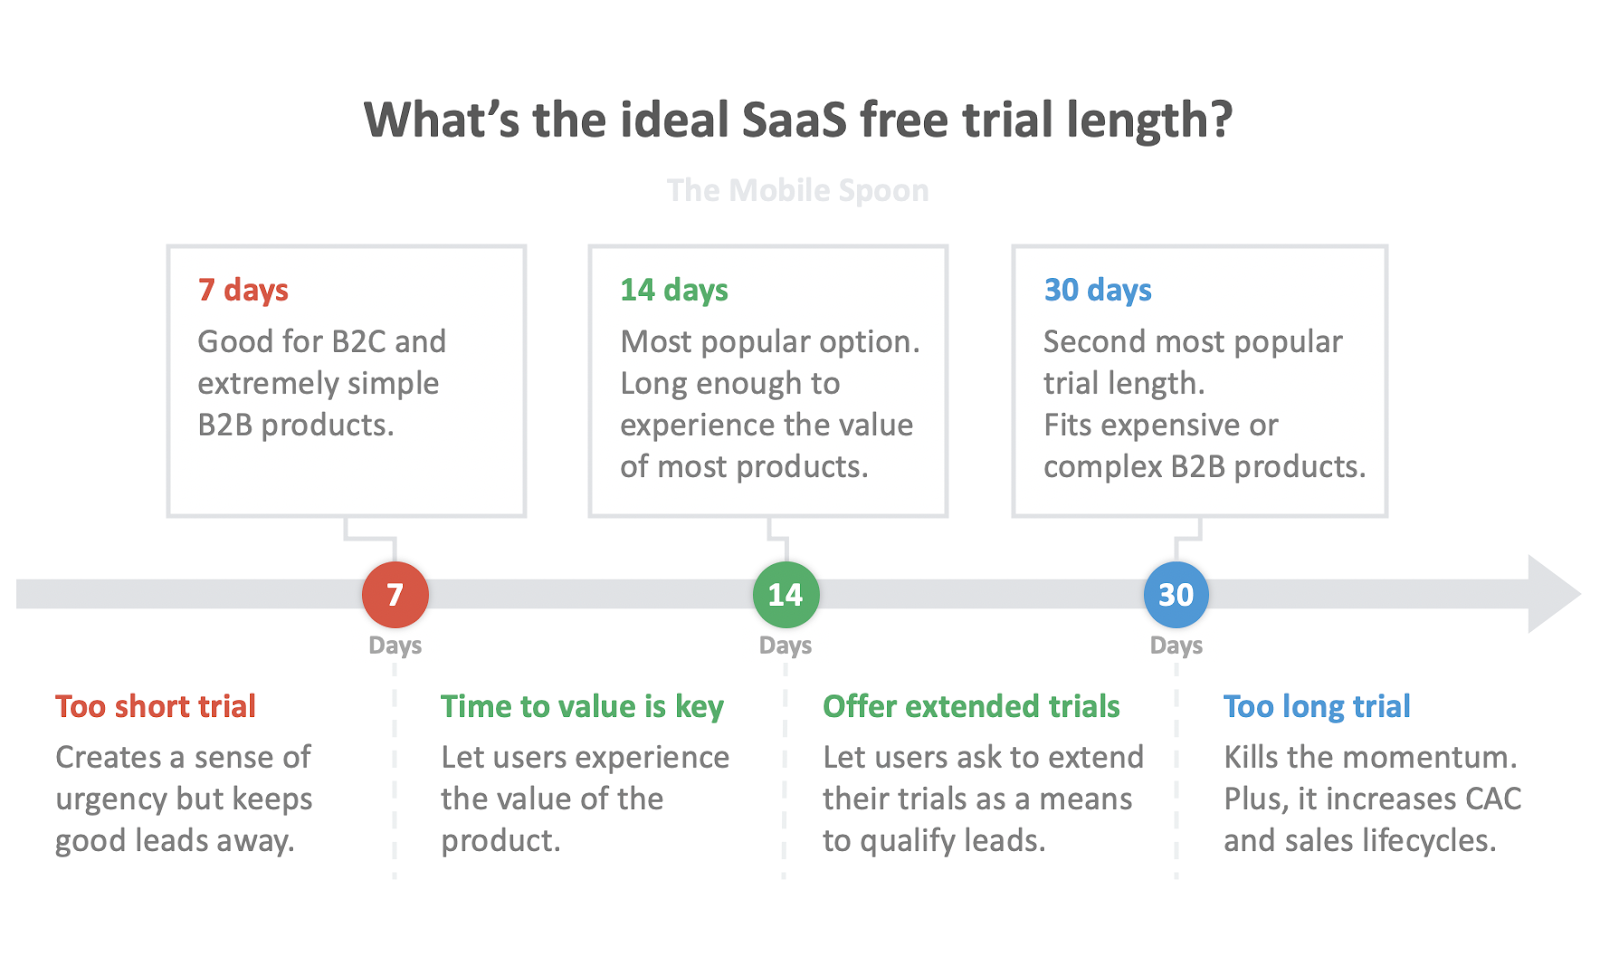 the ideal SaaS free trial length